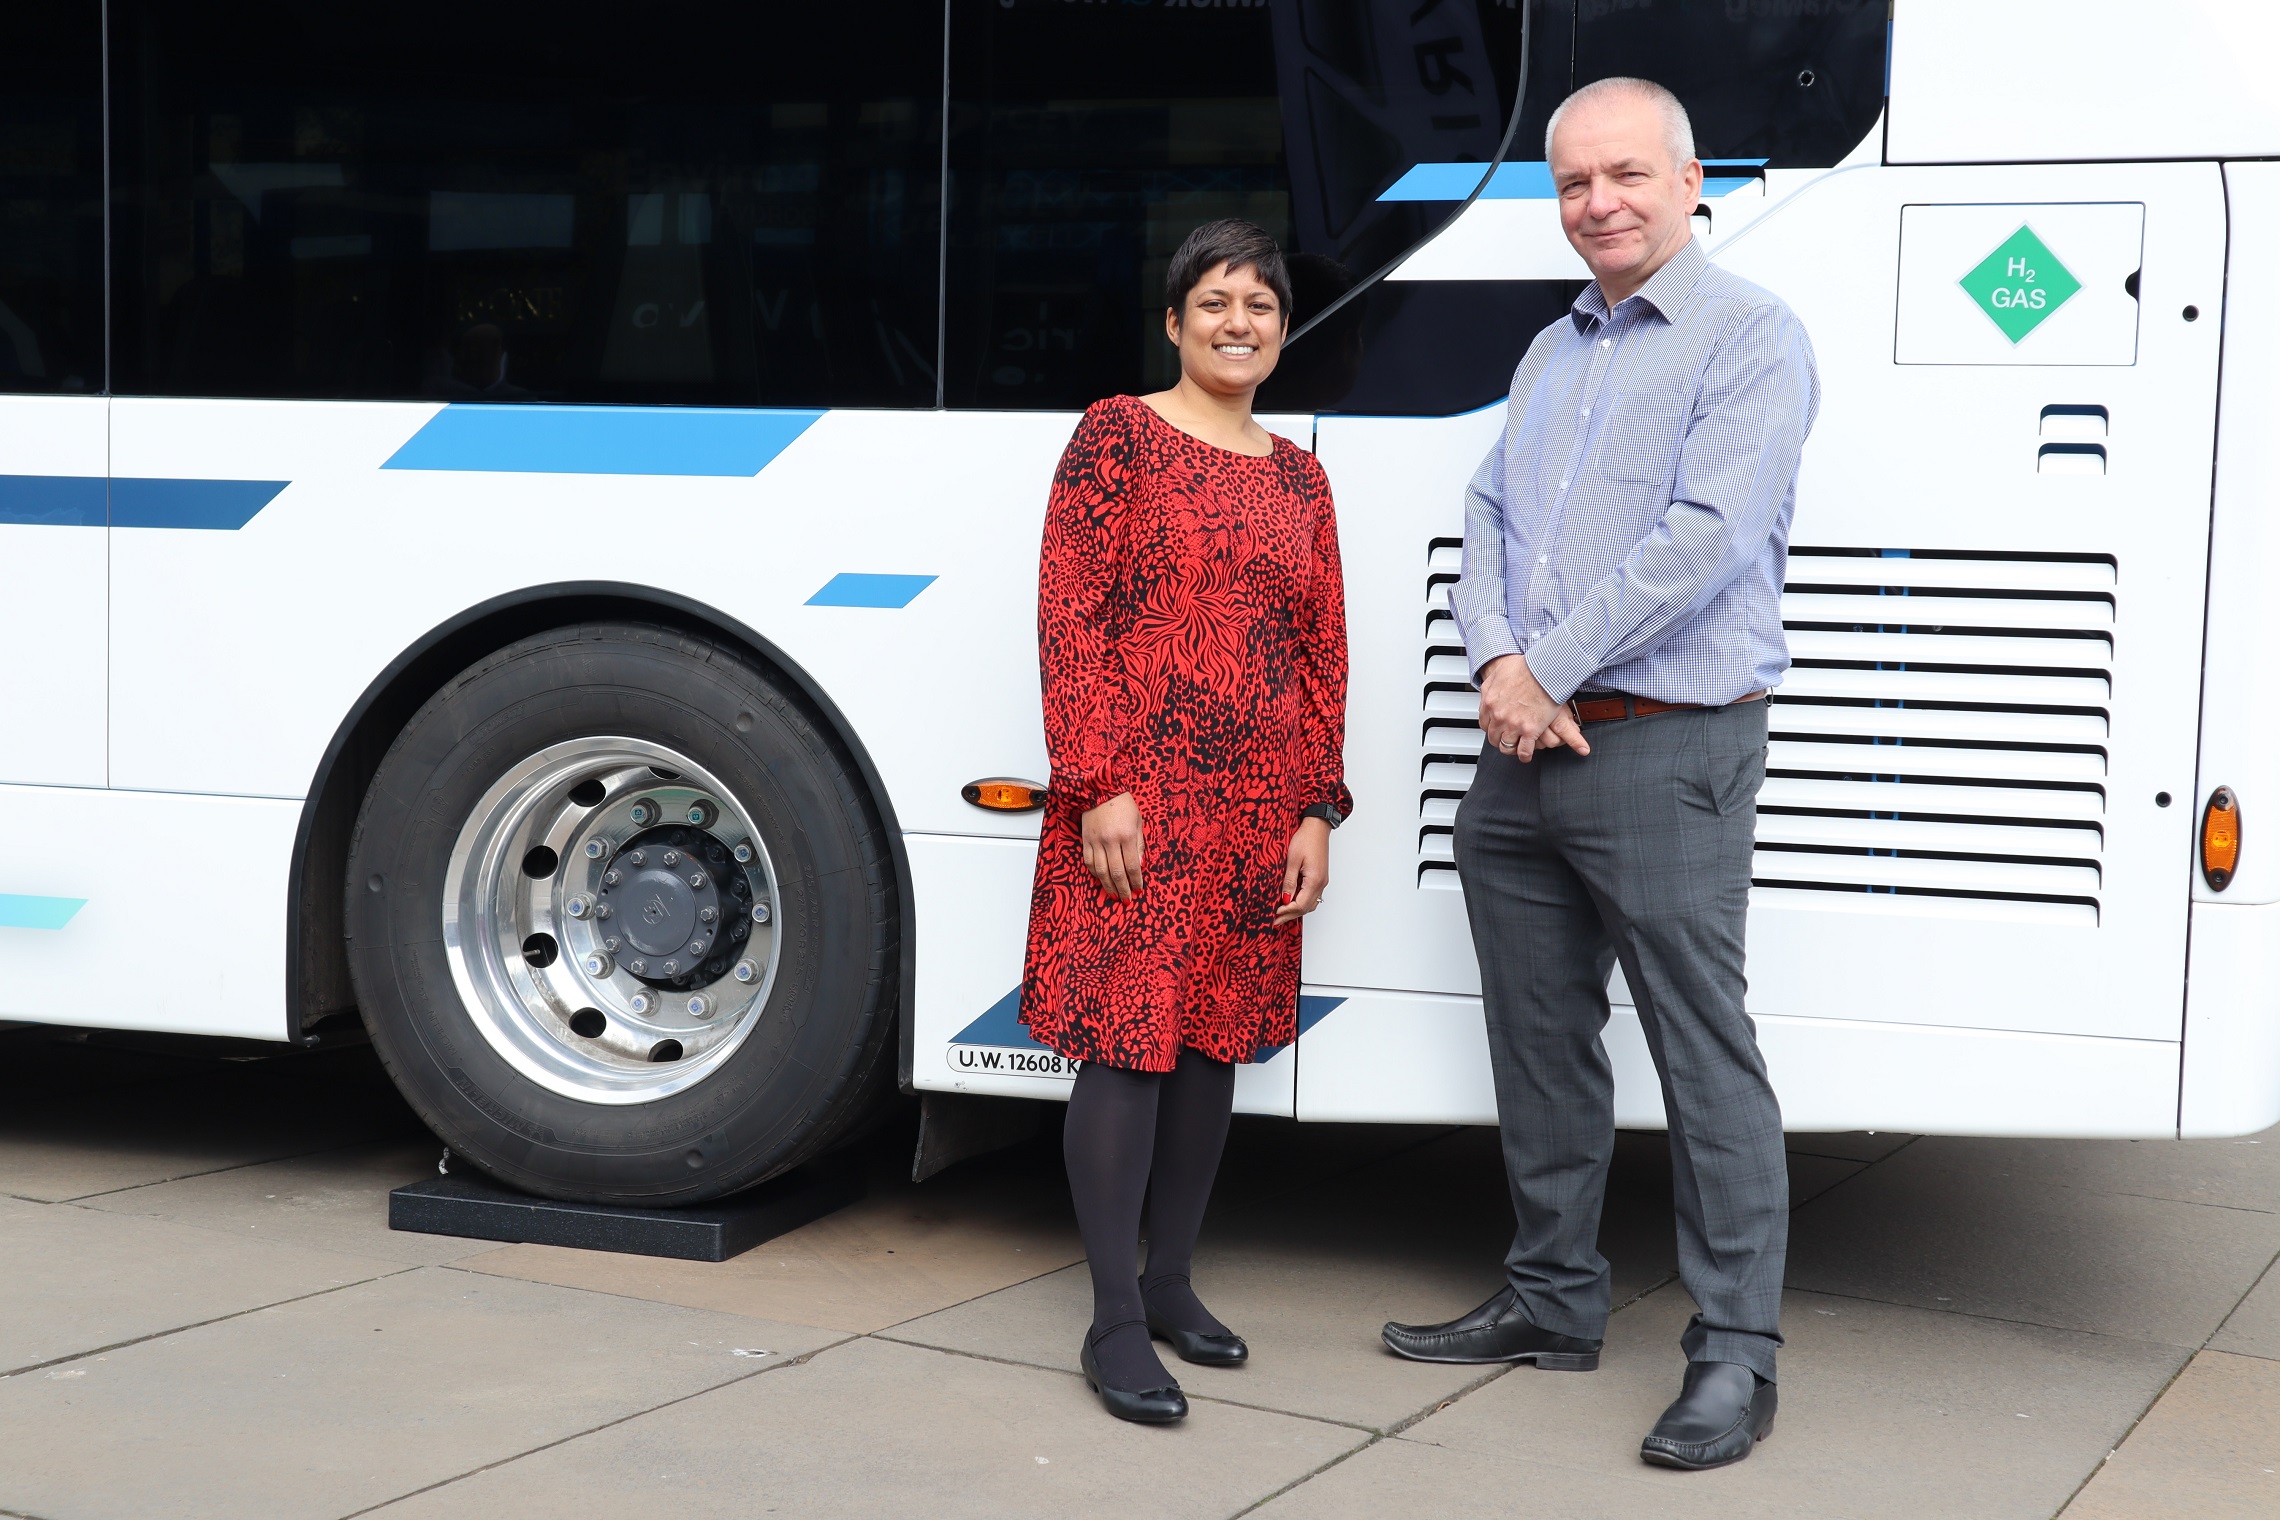 Association of Local Bus Managers opens partnership with Women in Transport